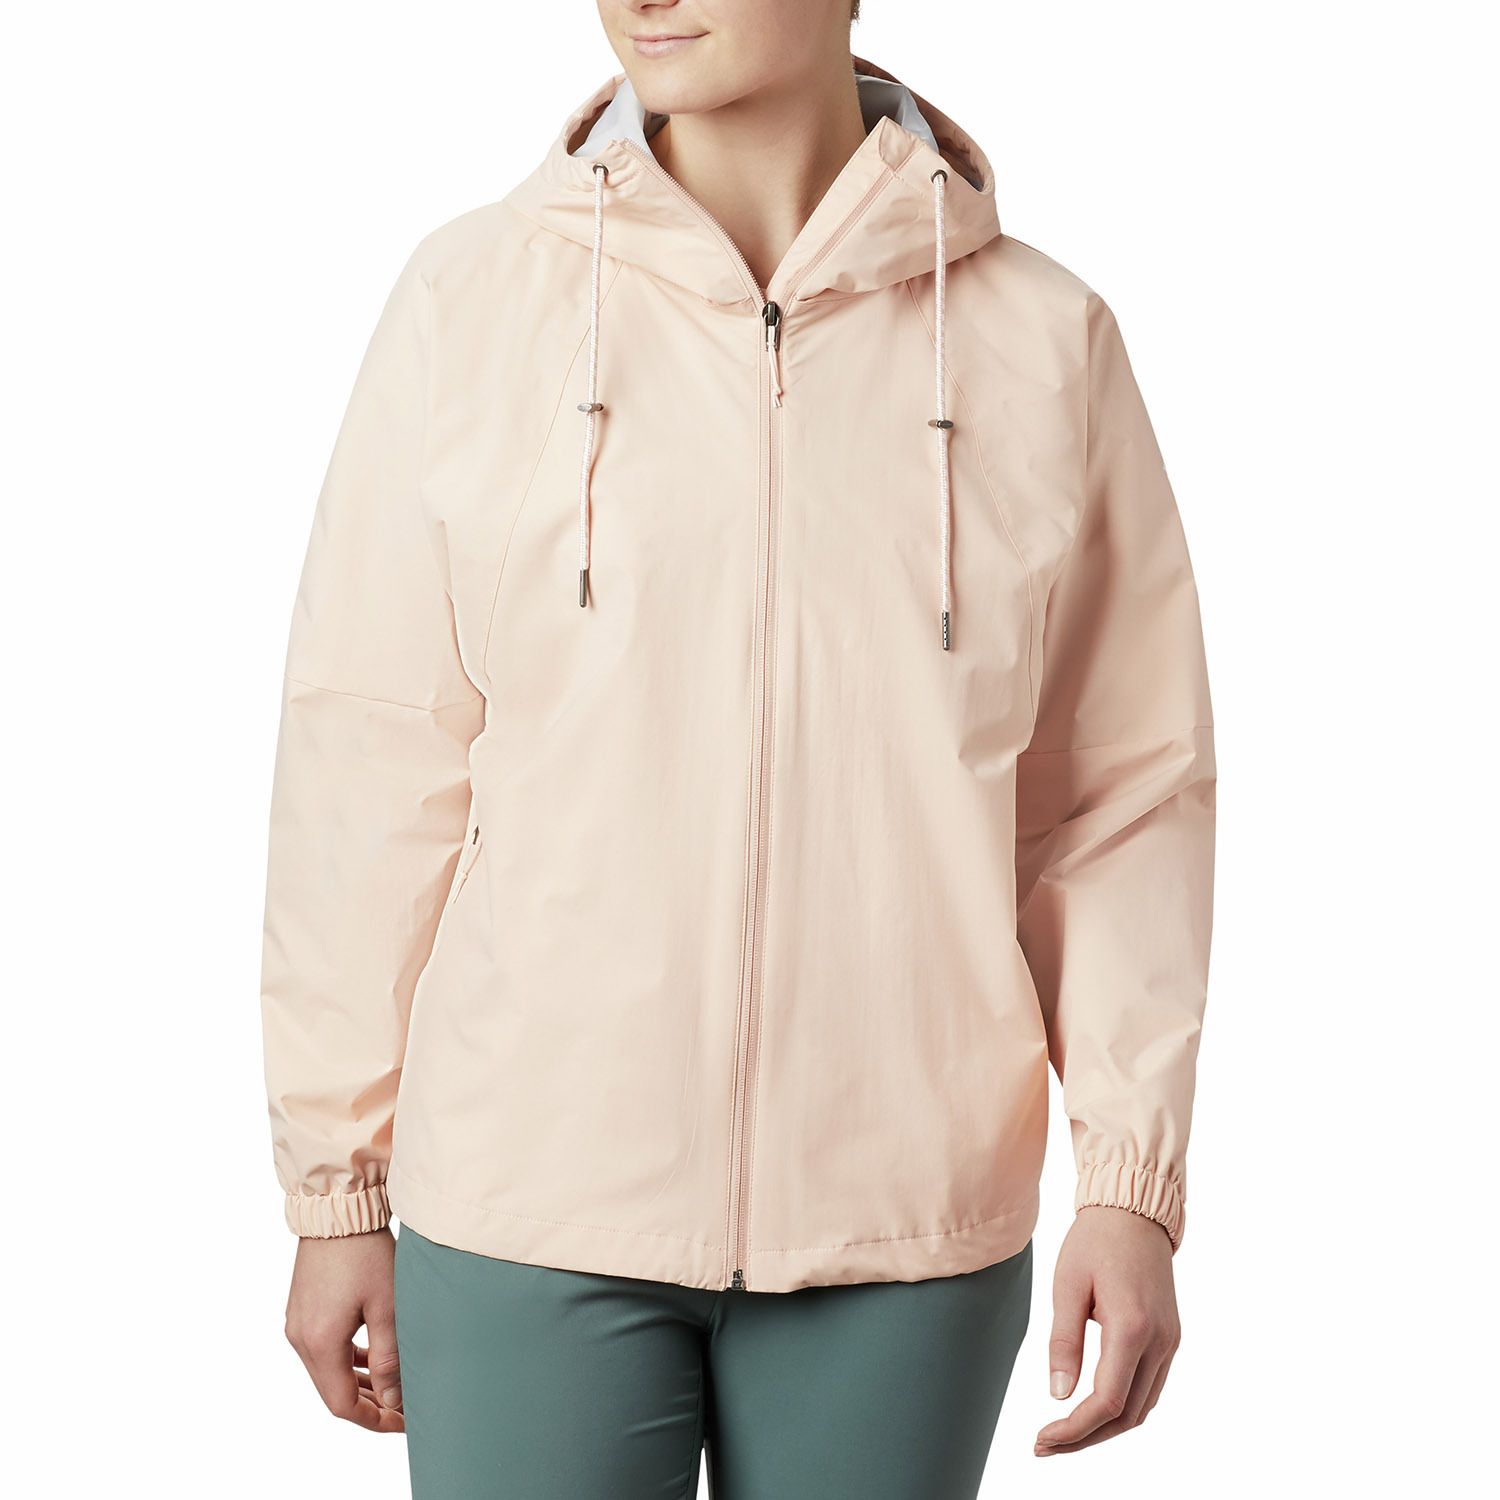 clearance columbia women's jackets